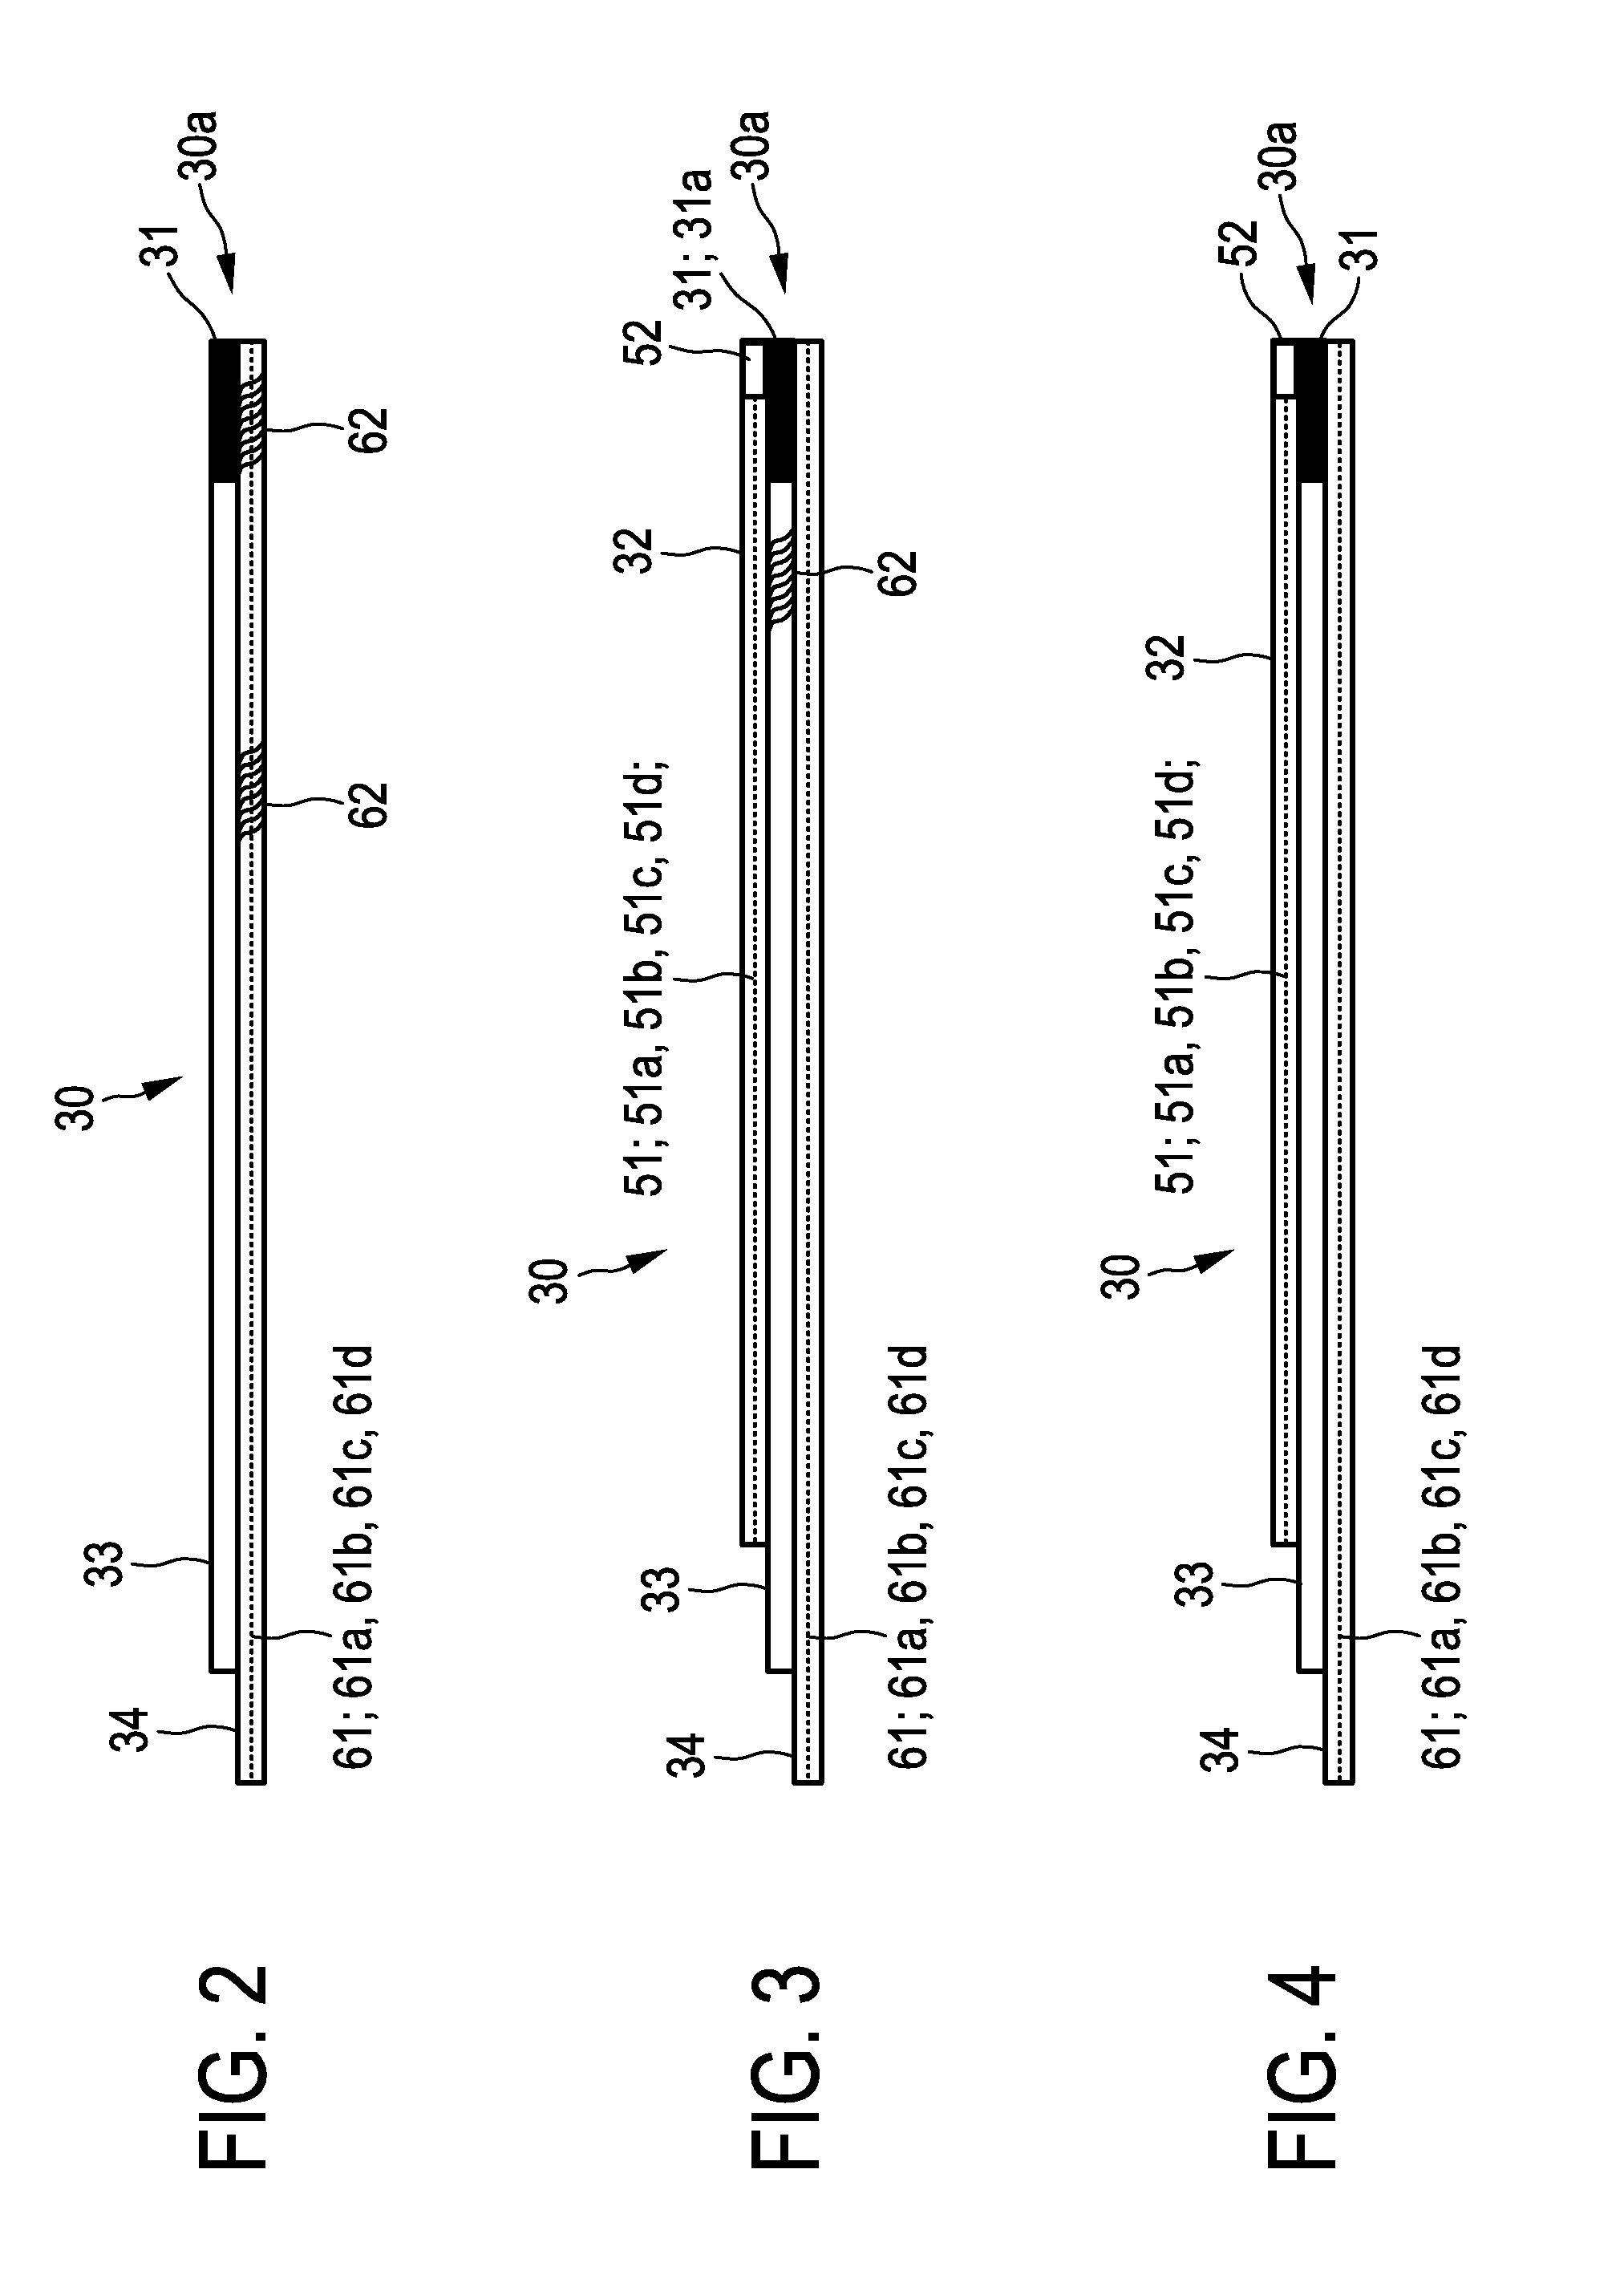 Apparatus and method for electronic brachytherapy